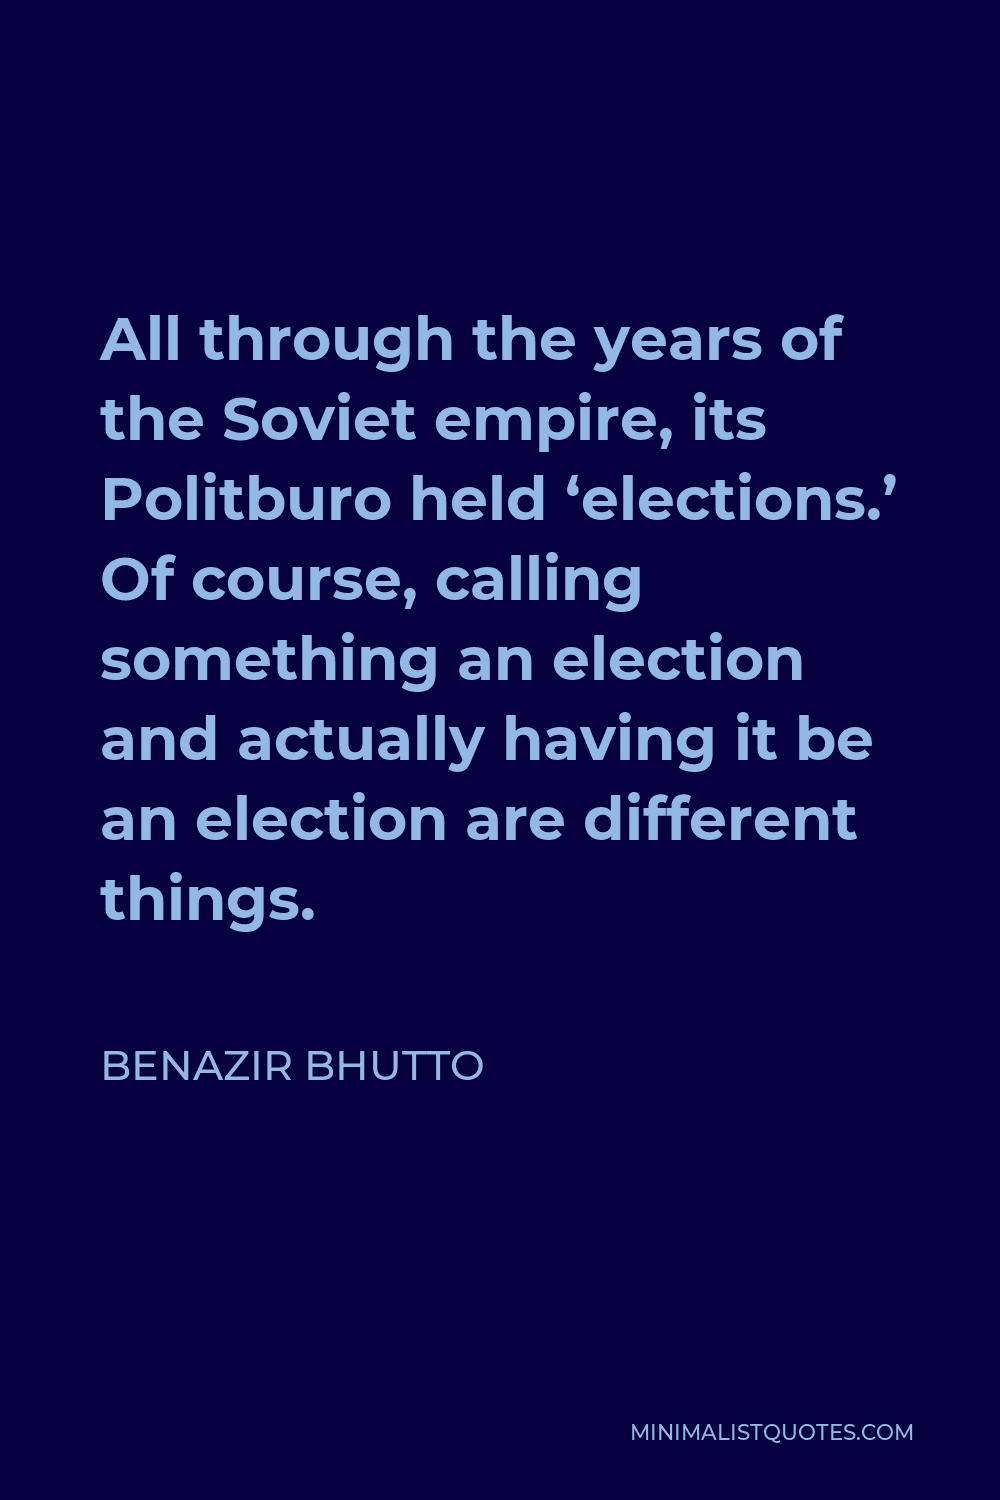 Benazir Bhutto Quote - All through the years of the Soviet empire, its Politburo held ‘elections.’ Of course, calling something an election and actually having it be an election are different things.